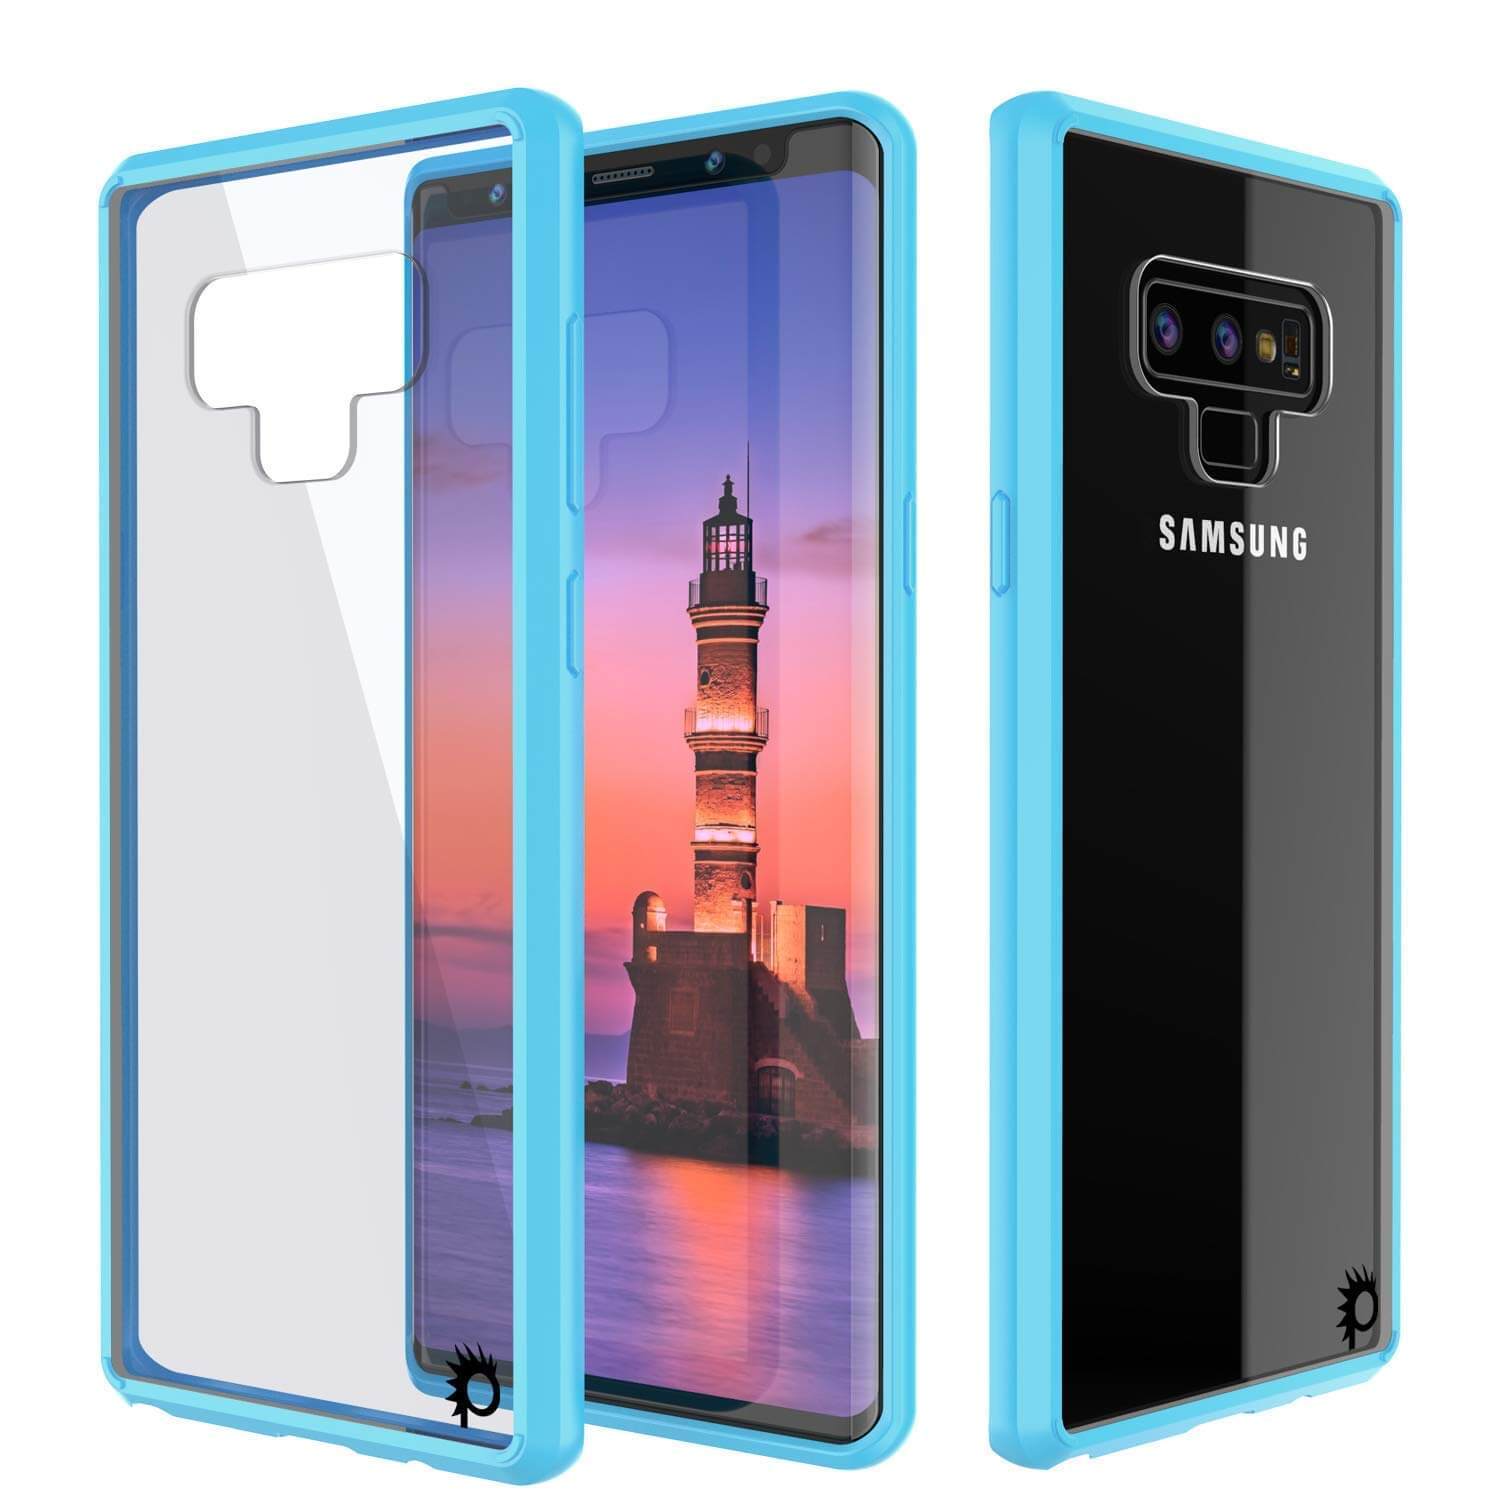 Galaxy Note 9 Case, PUNKcase [LUCID 2.0 Series] [Slim Fit] Armor Cover W/Integrated Anti-Shock System [Light Blue] (Color in image: Black)